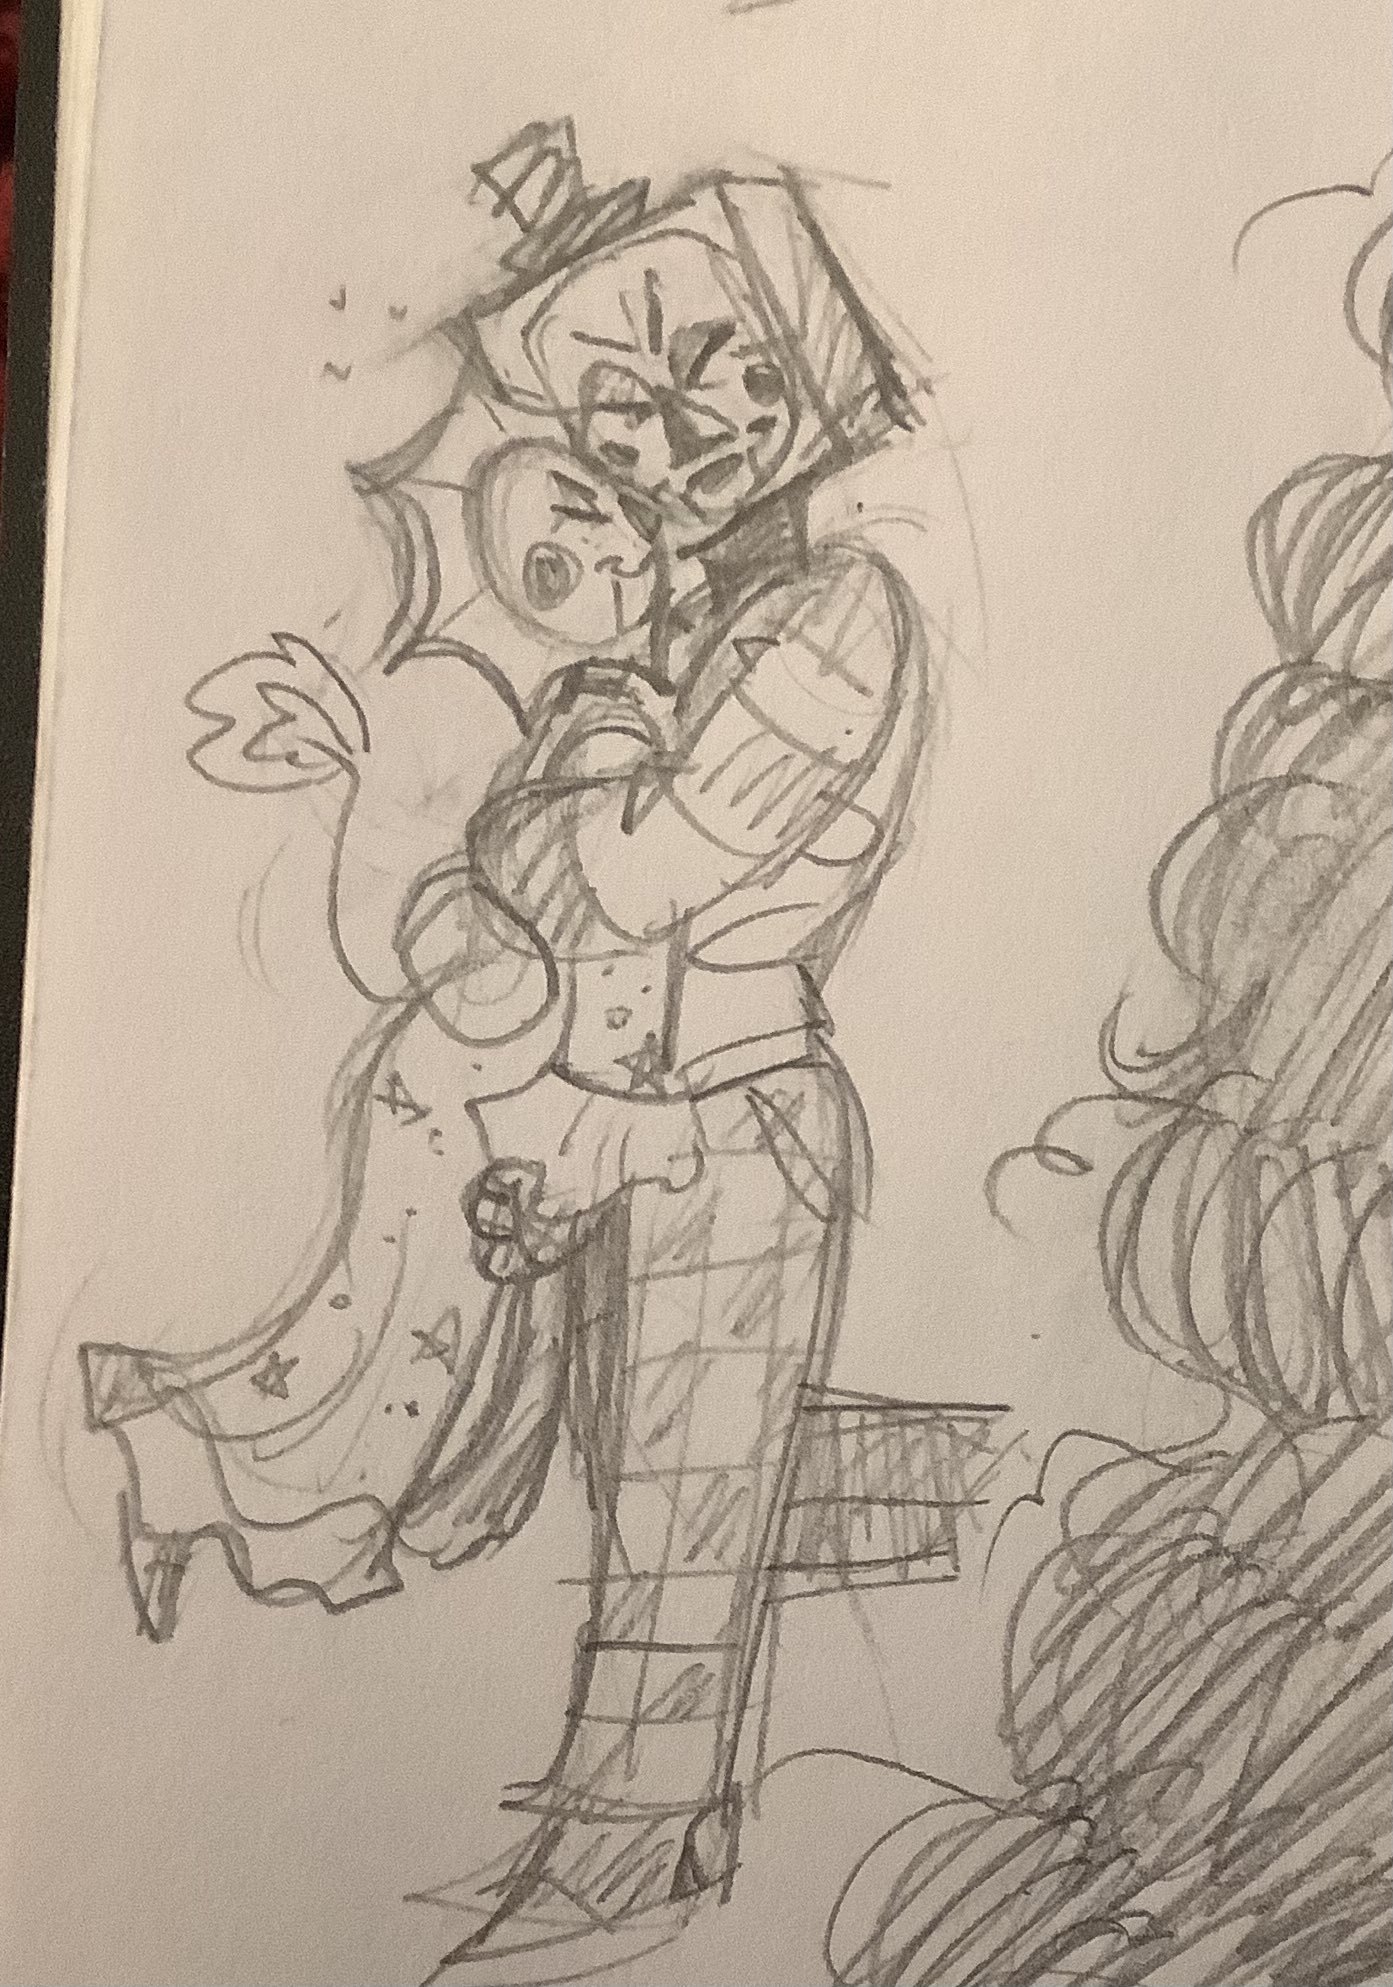 Sunny and The Toymaker huggin